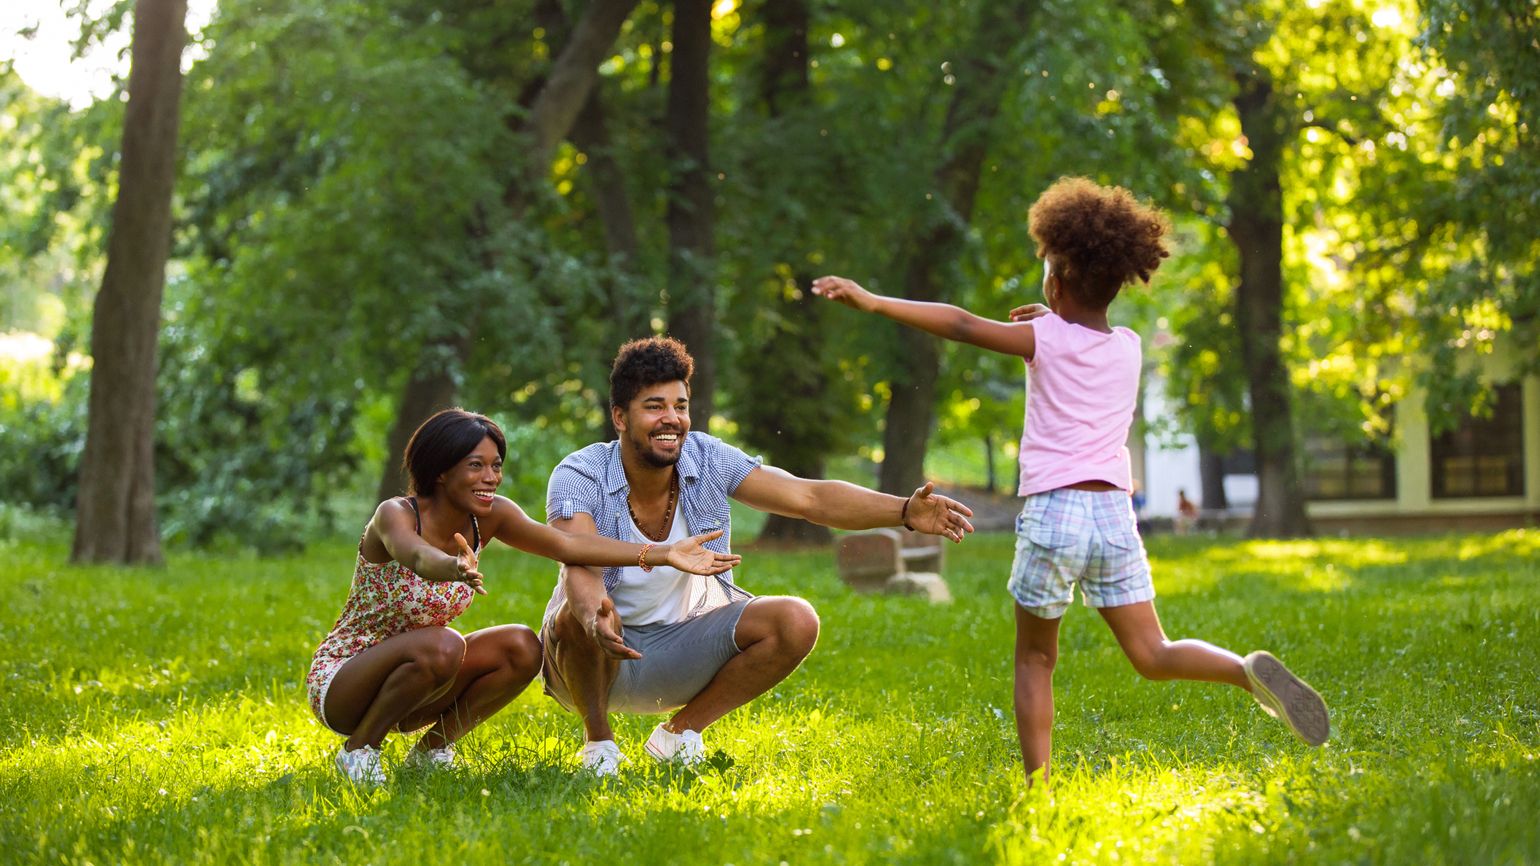 A young girl having fun in the park with her parents.